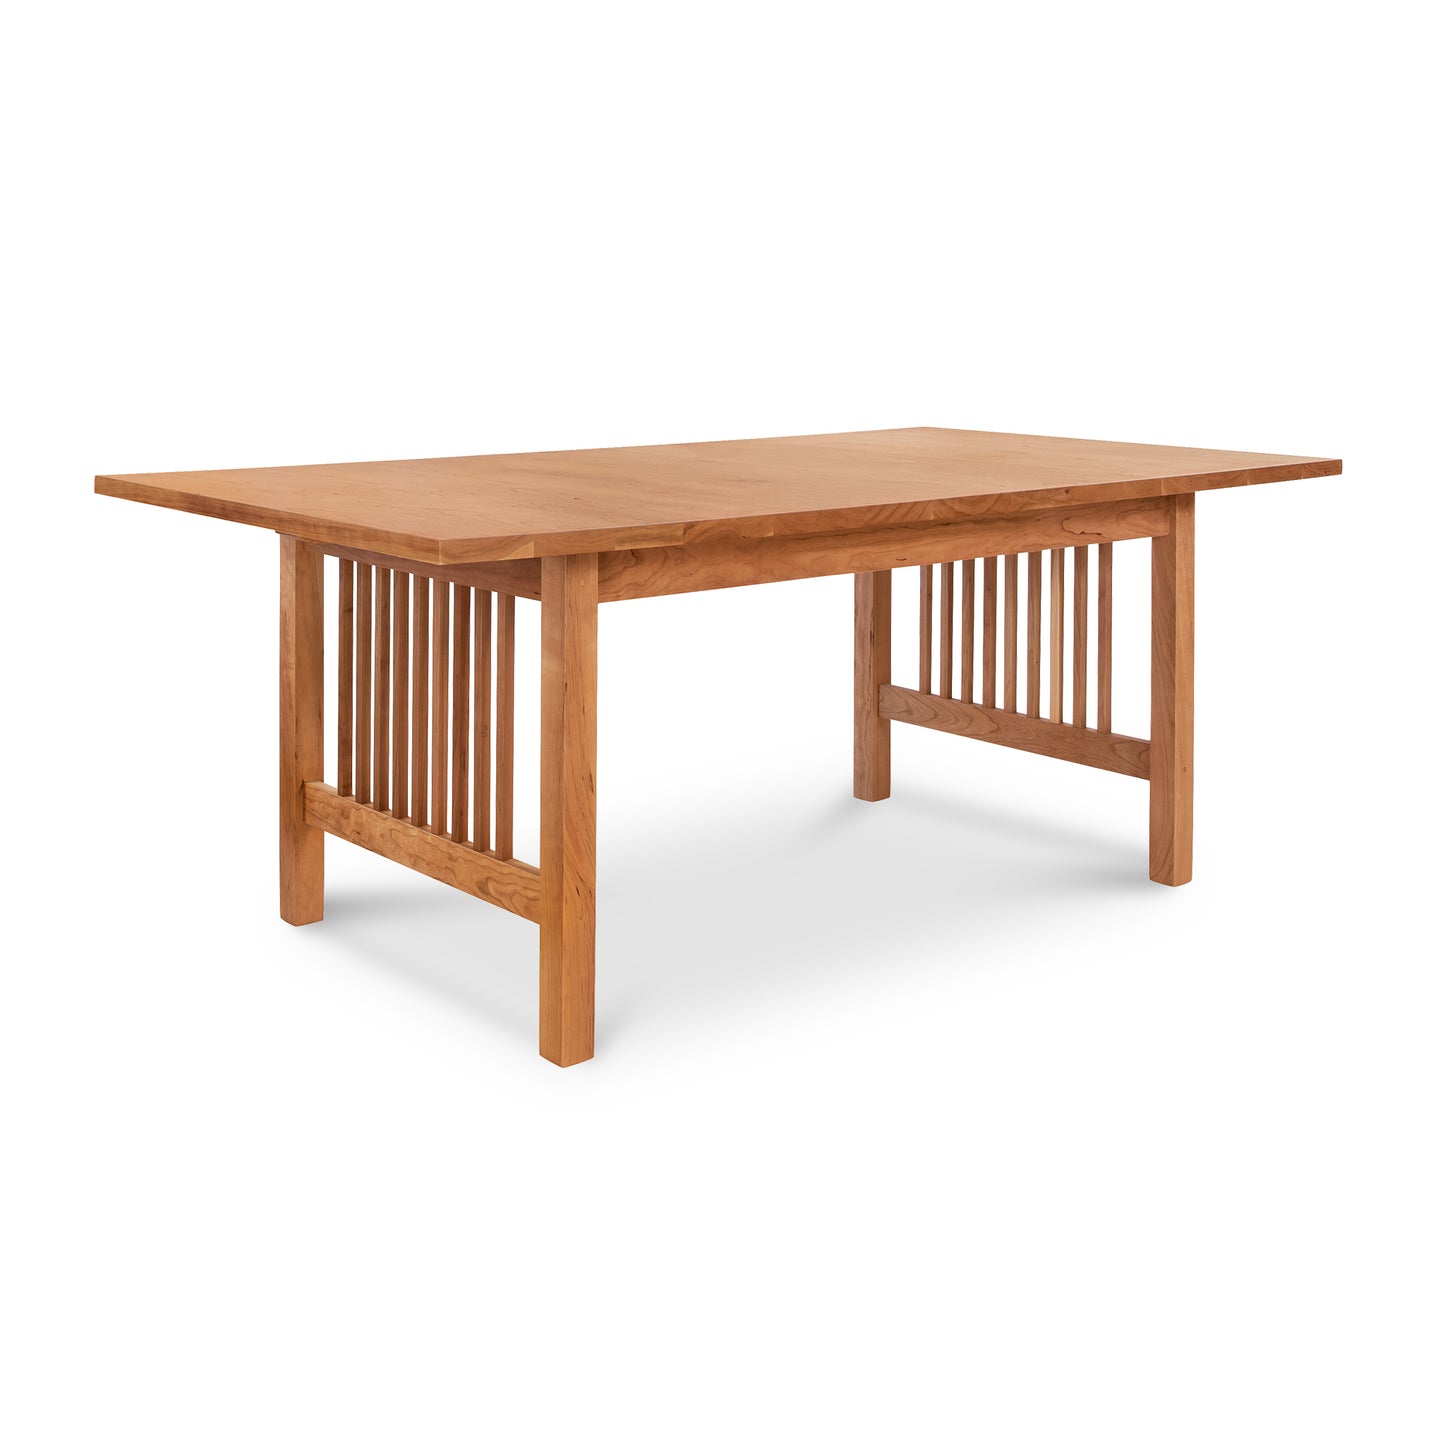 A Lyndon Furniture American Mission Solid Top Dining Table with a traditional design combining solid construction and a wooden top.